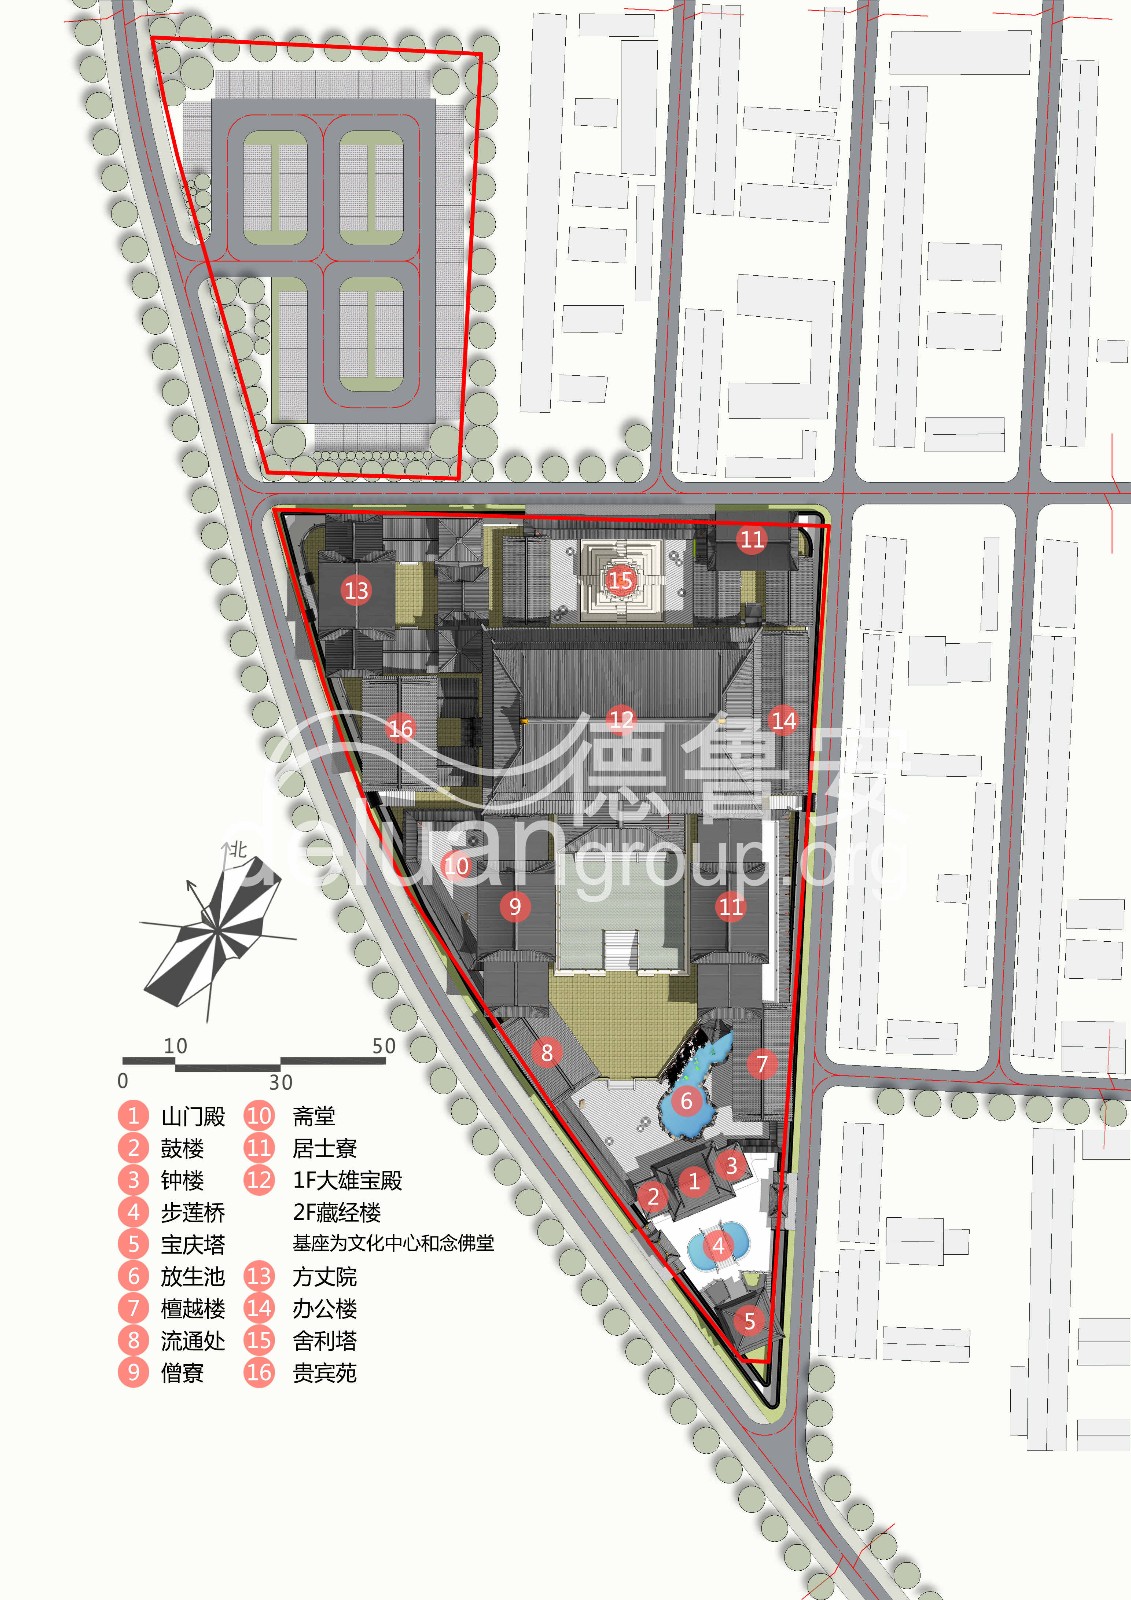 Planning and design of Baoqing temple in Xianghe(图9)